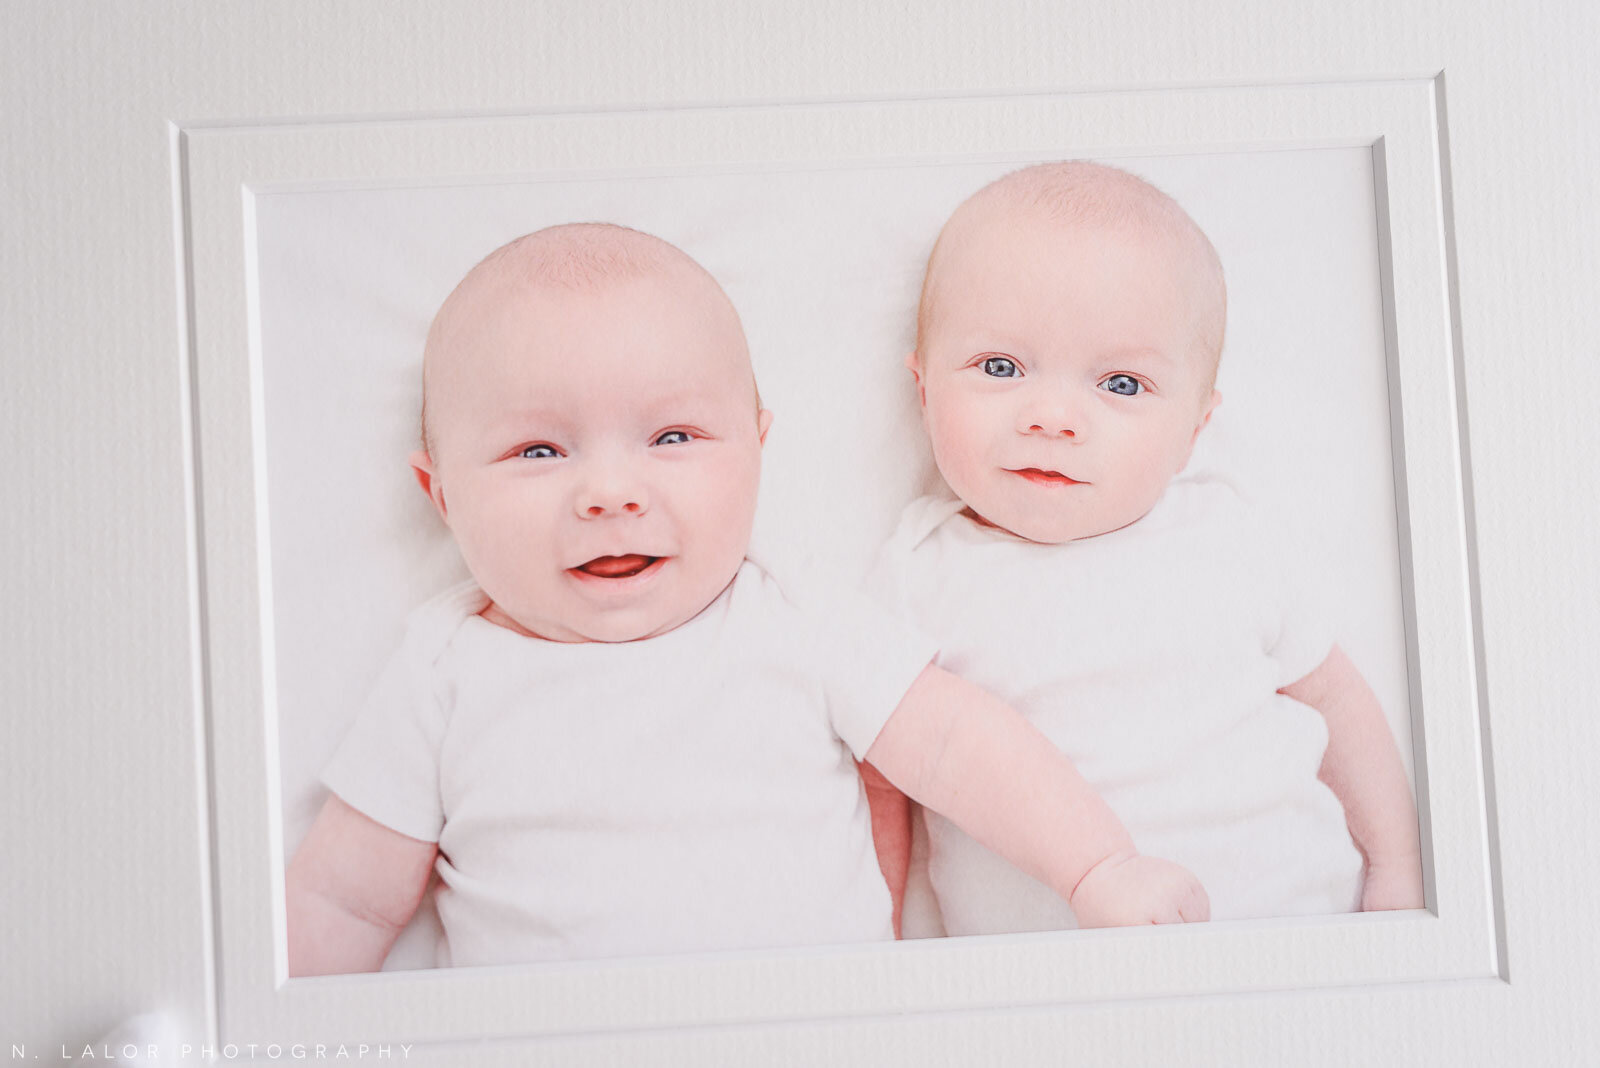 nlalor-photography-2018-twins-baby-photo-session-greenwich-connecticut-10.jpg